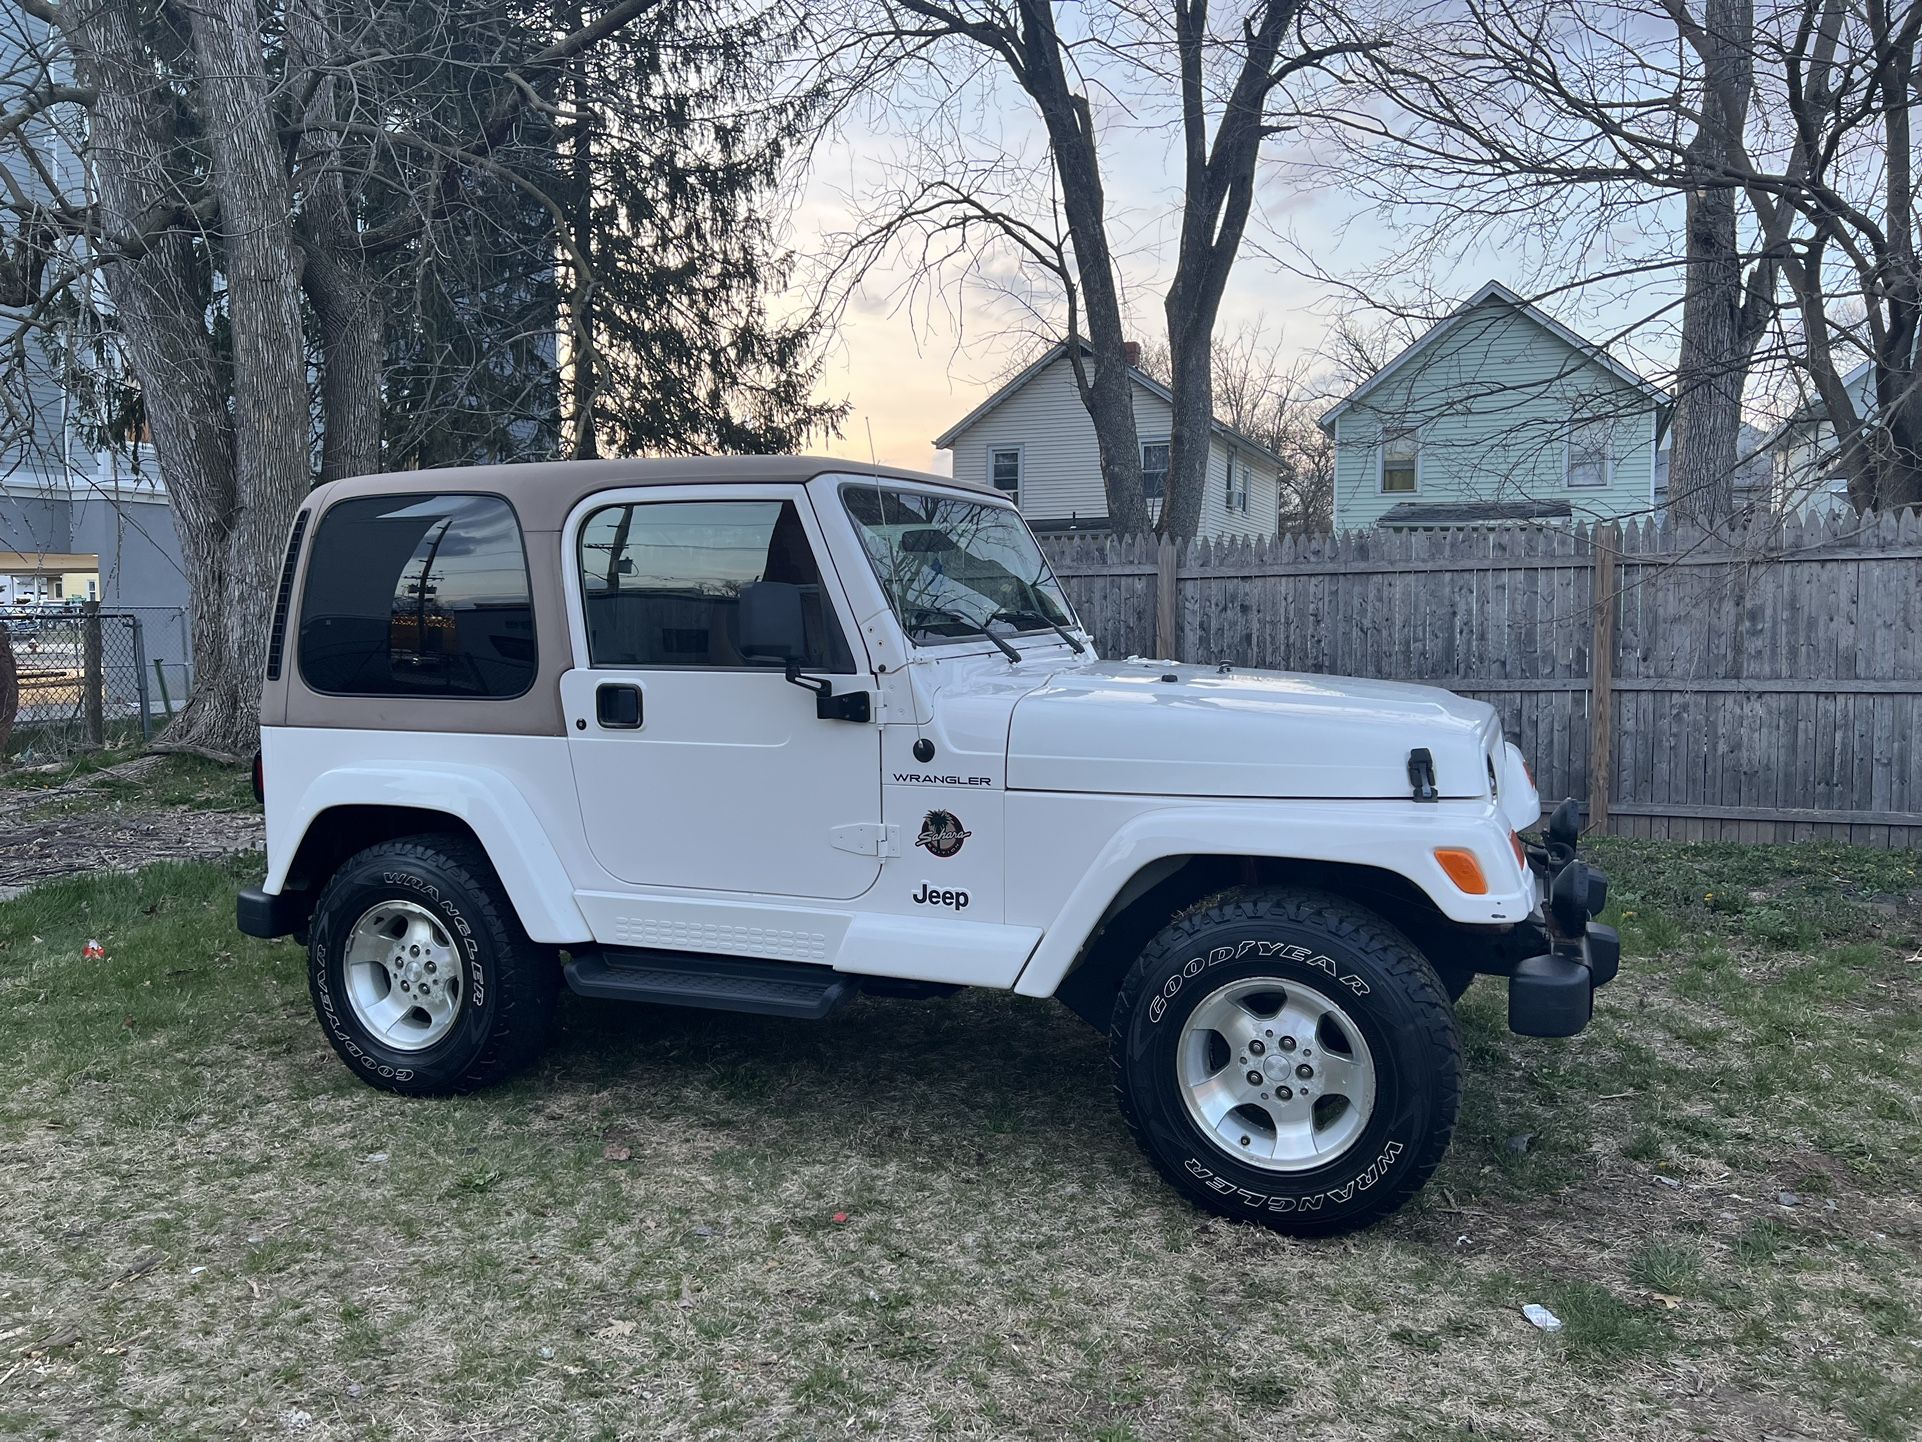 2002 Jeep Wrangler for Sale in South Bound Brook, NJ - OfferUp